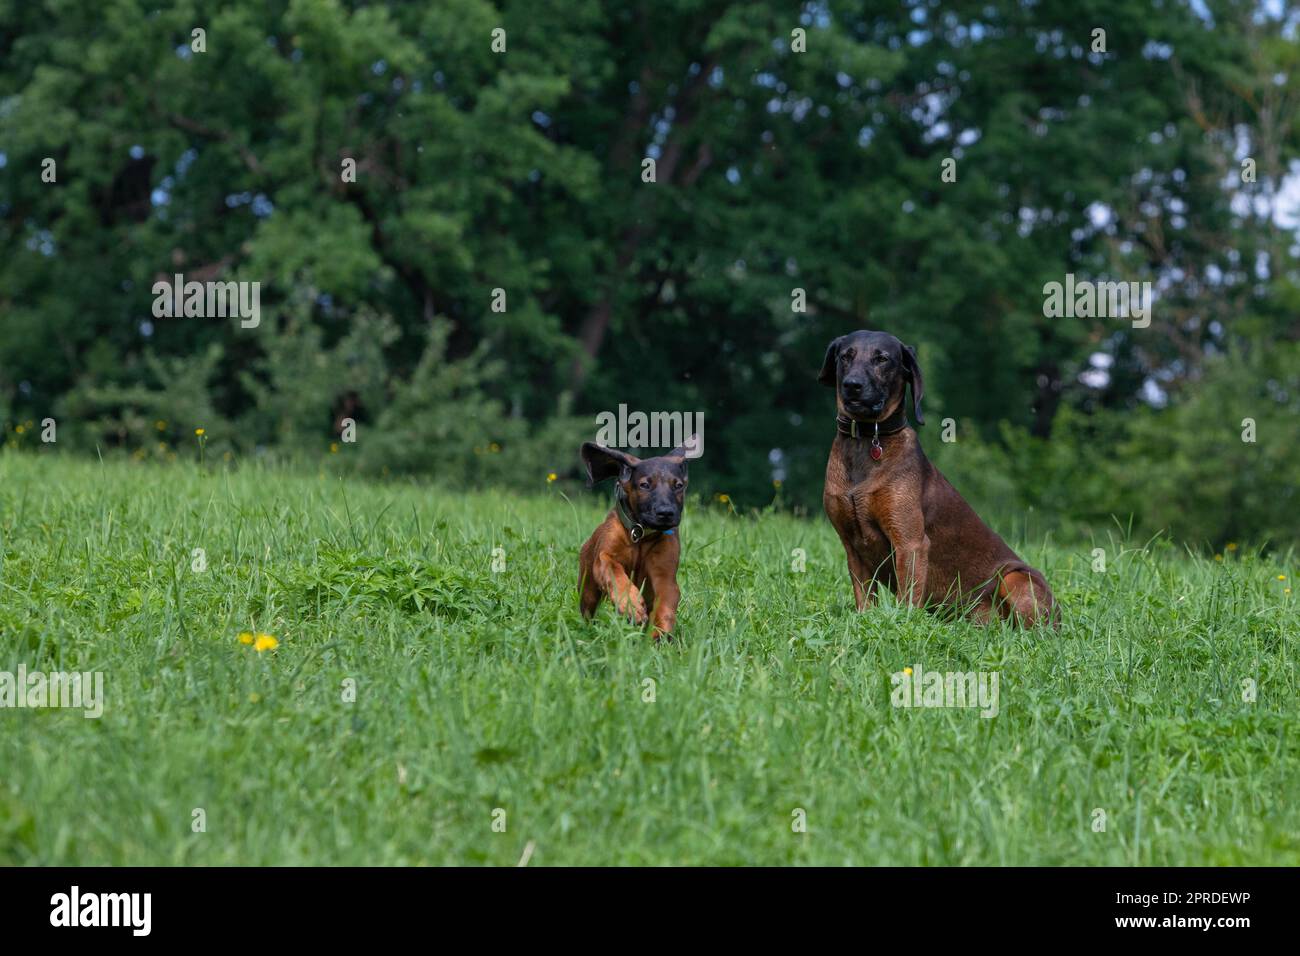 older tracker dog watches youngster running Stock Photo